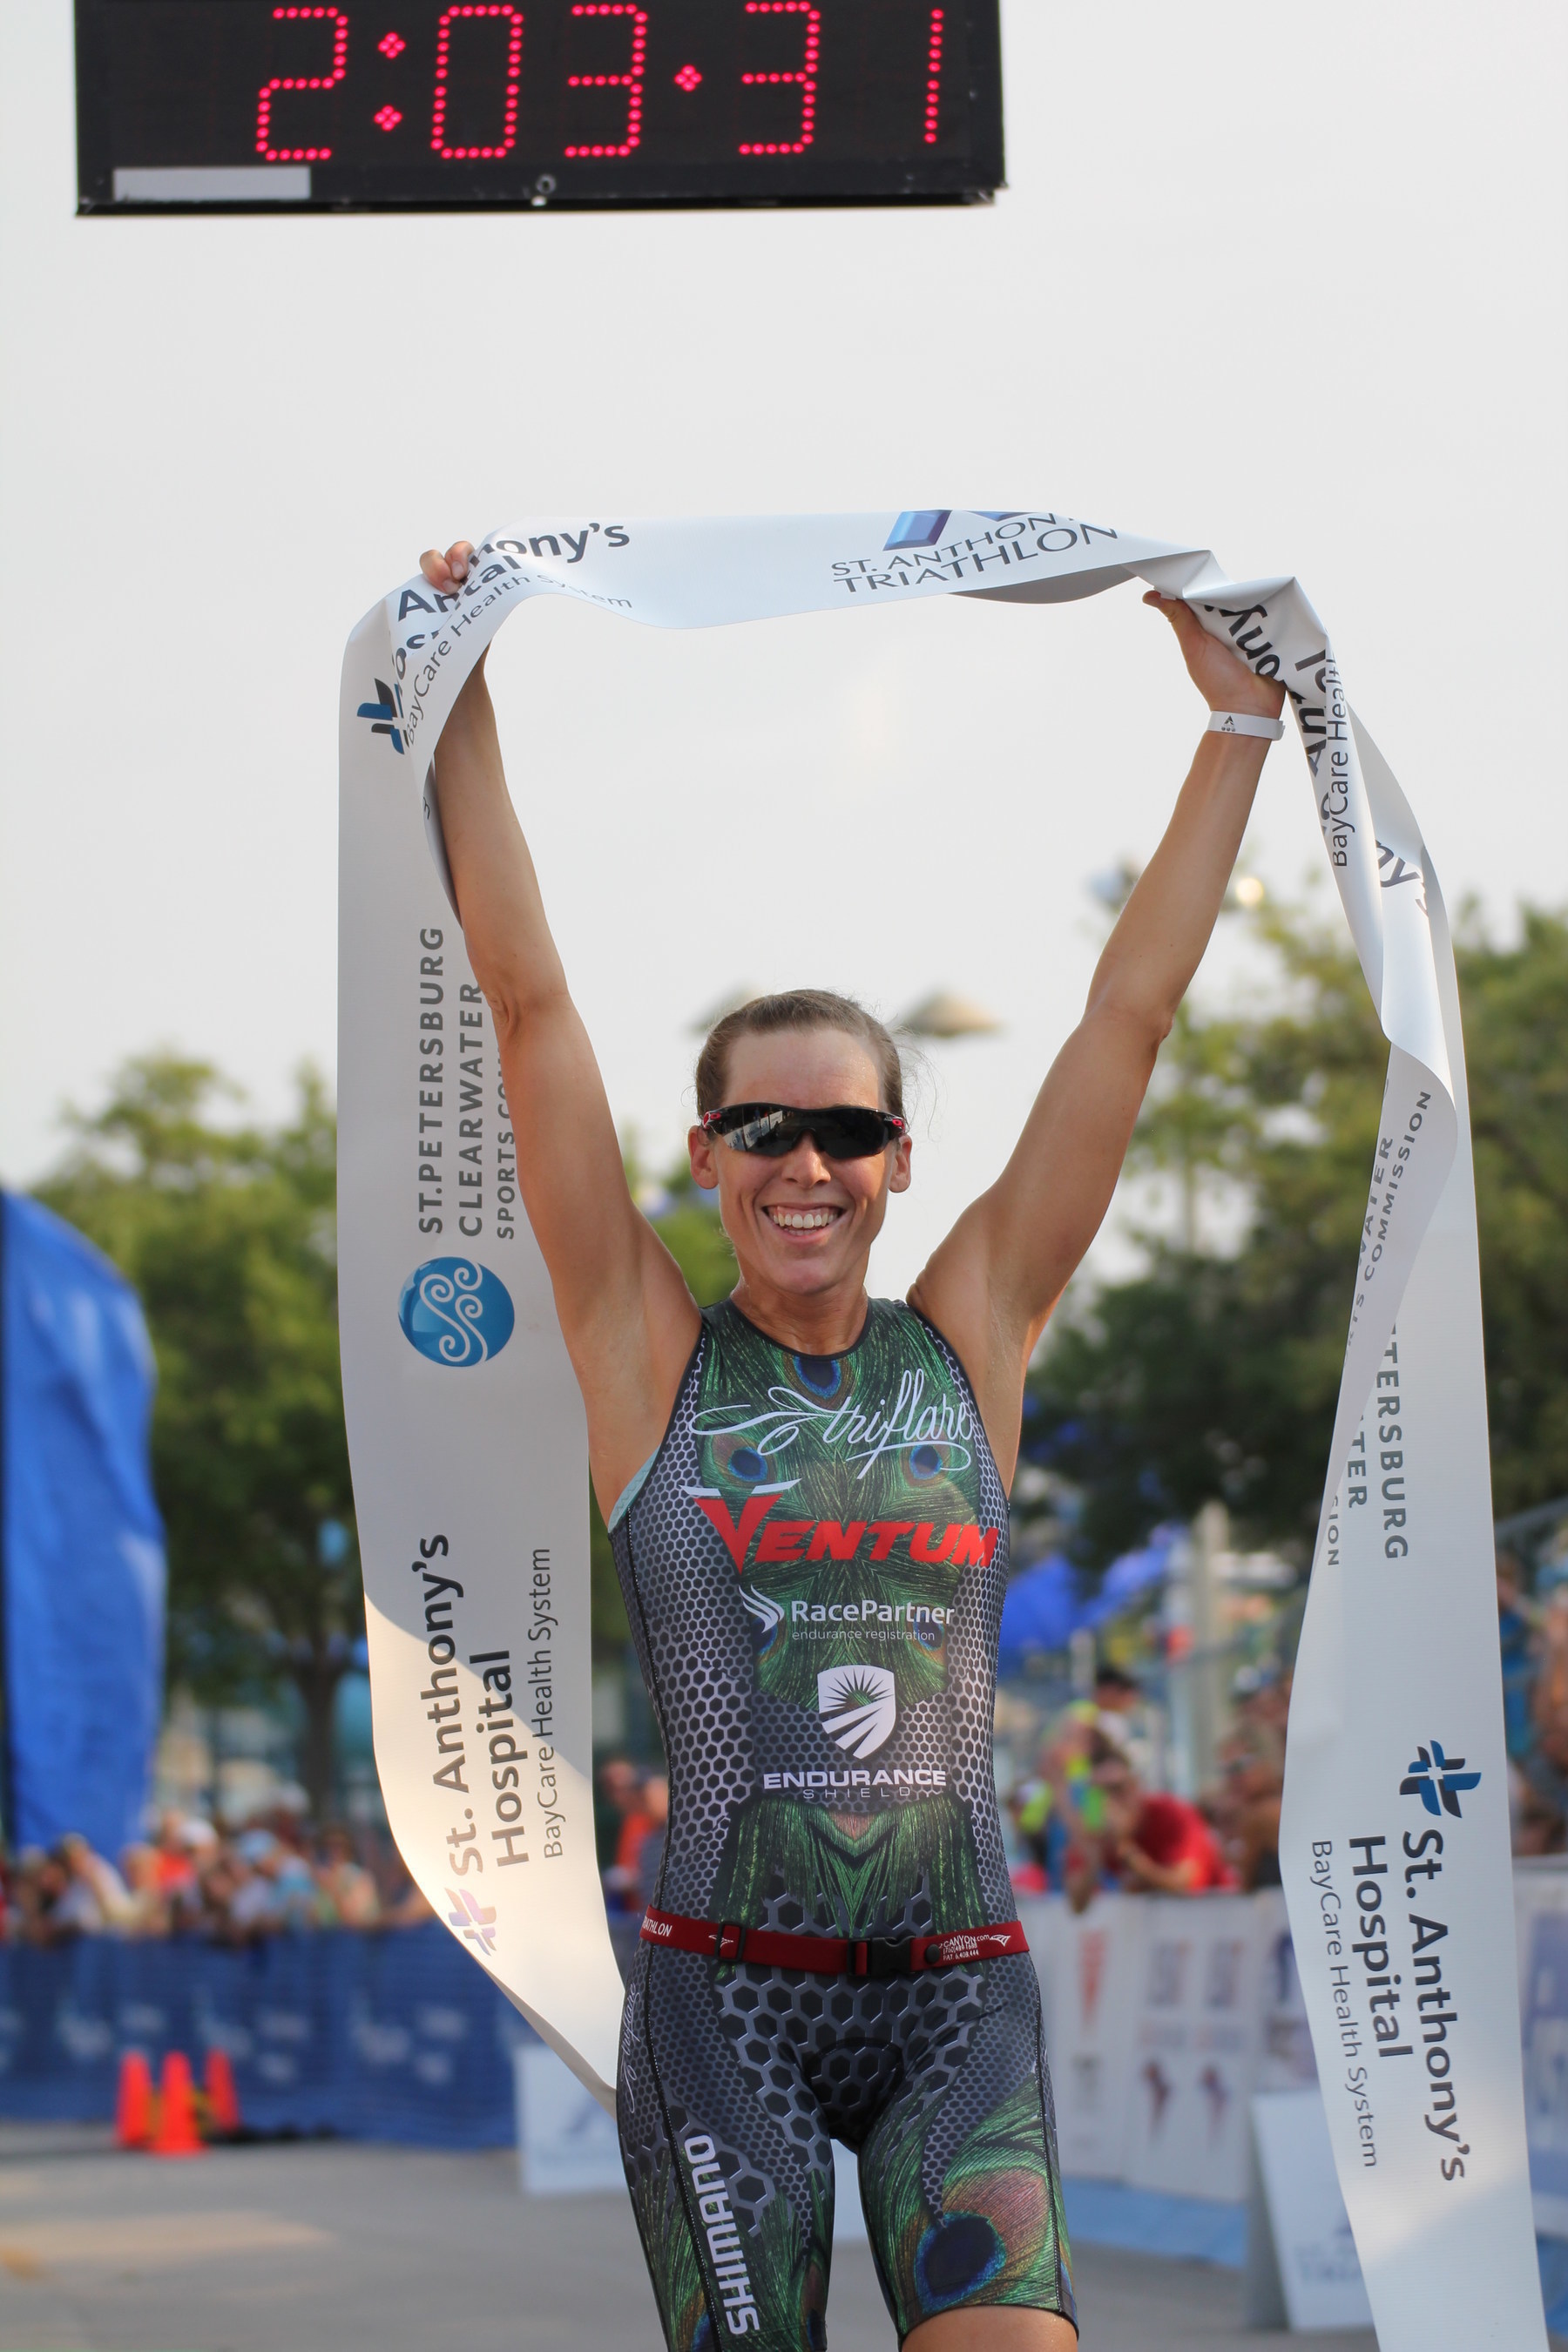 Alicia Kaye is the first female competitor across the finish line at the St. Anthony's Triathlon